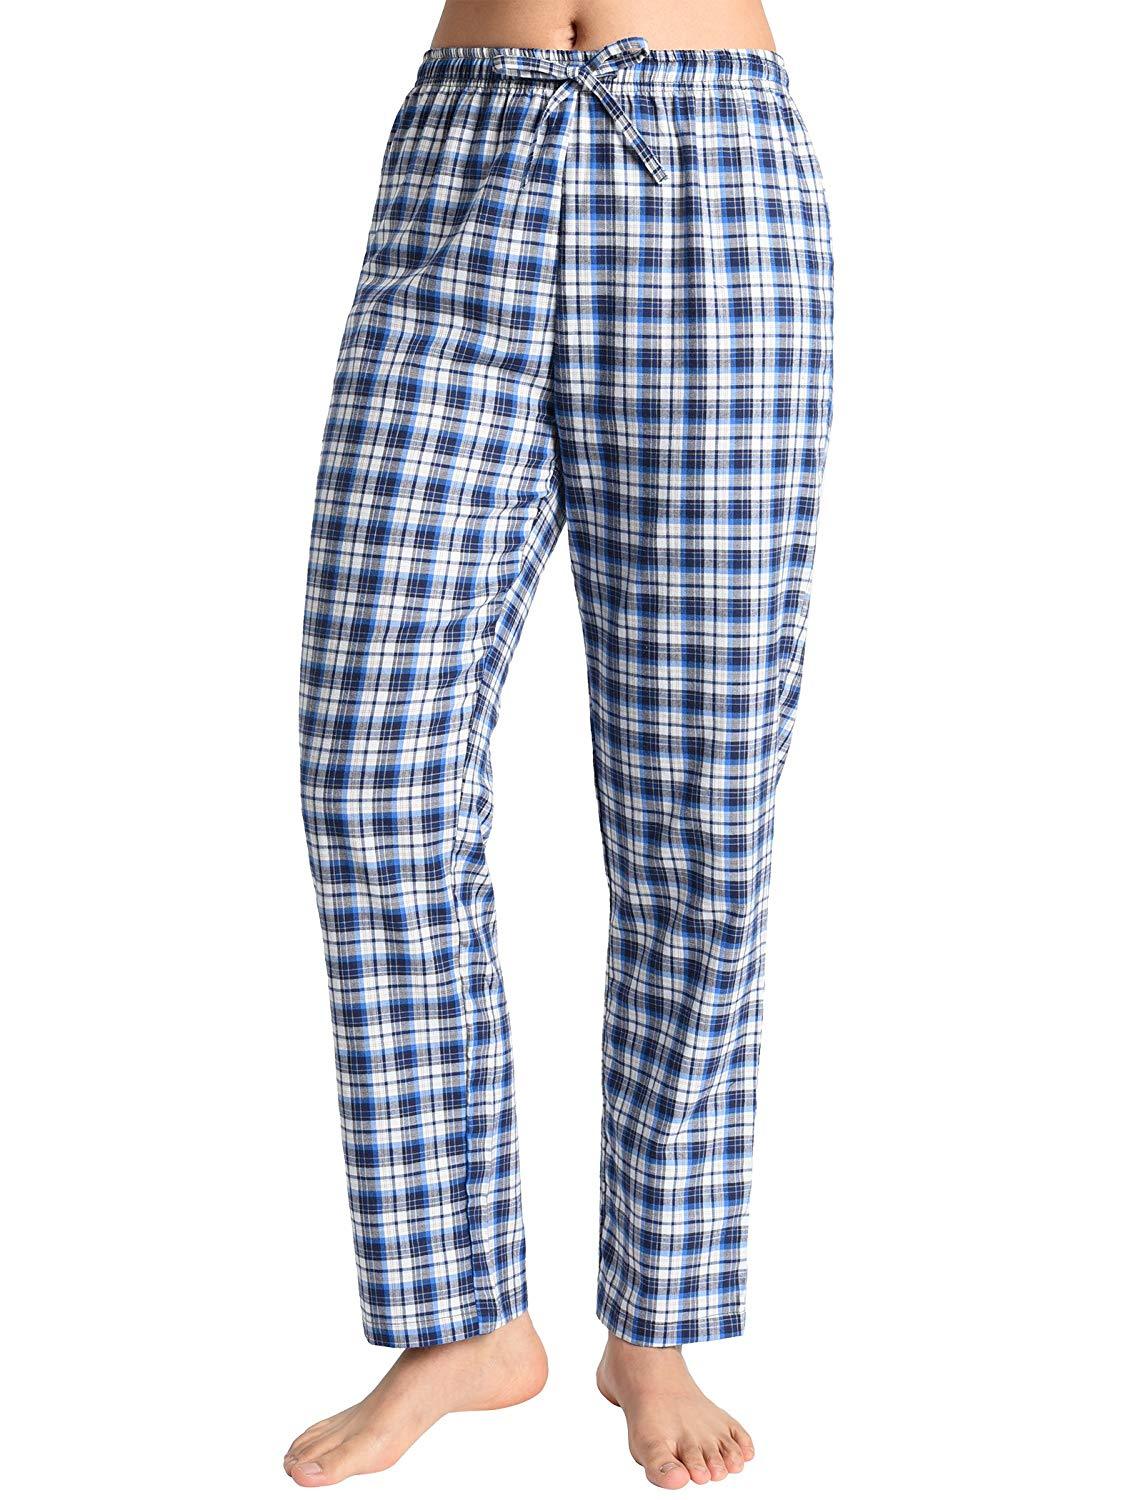 Buy Lazy One Pajamas for Women, Cute Pajama Pants and Top Separates, Dog  Mom at Amazon.in